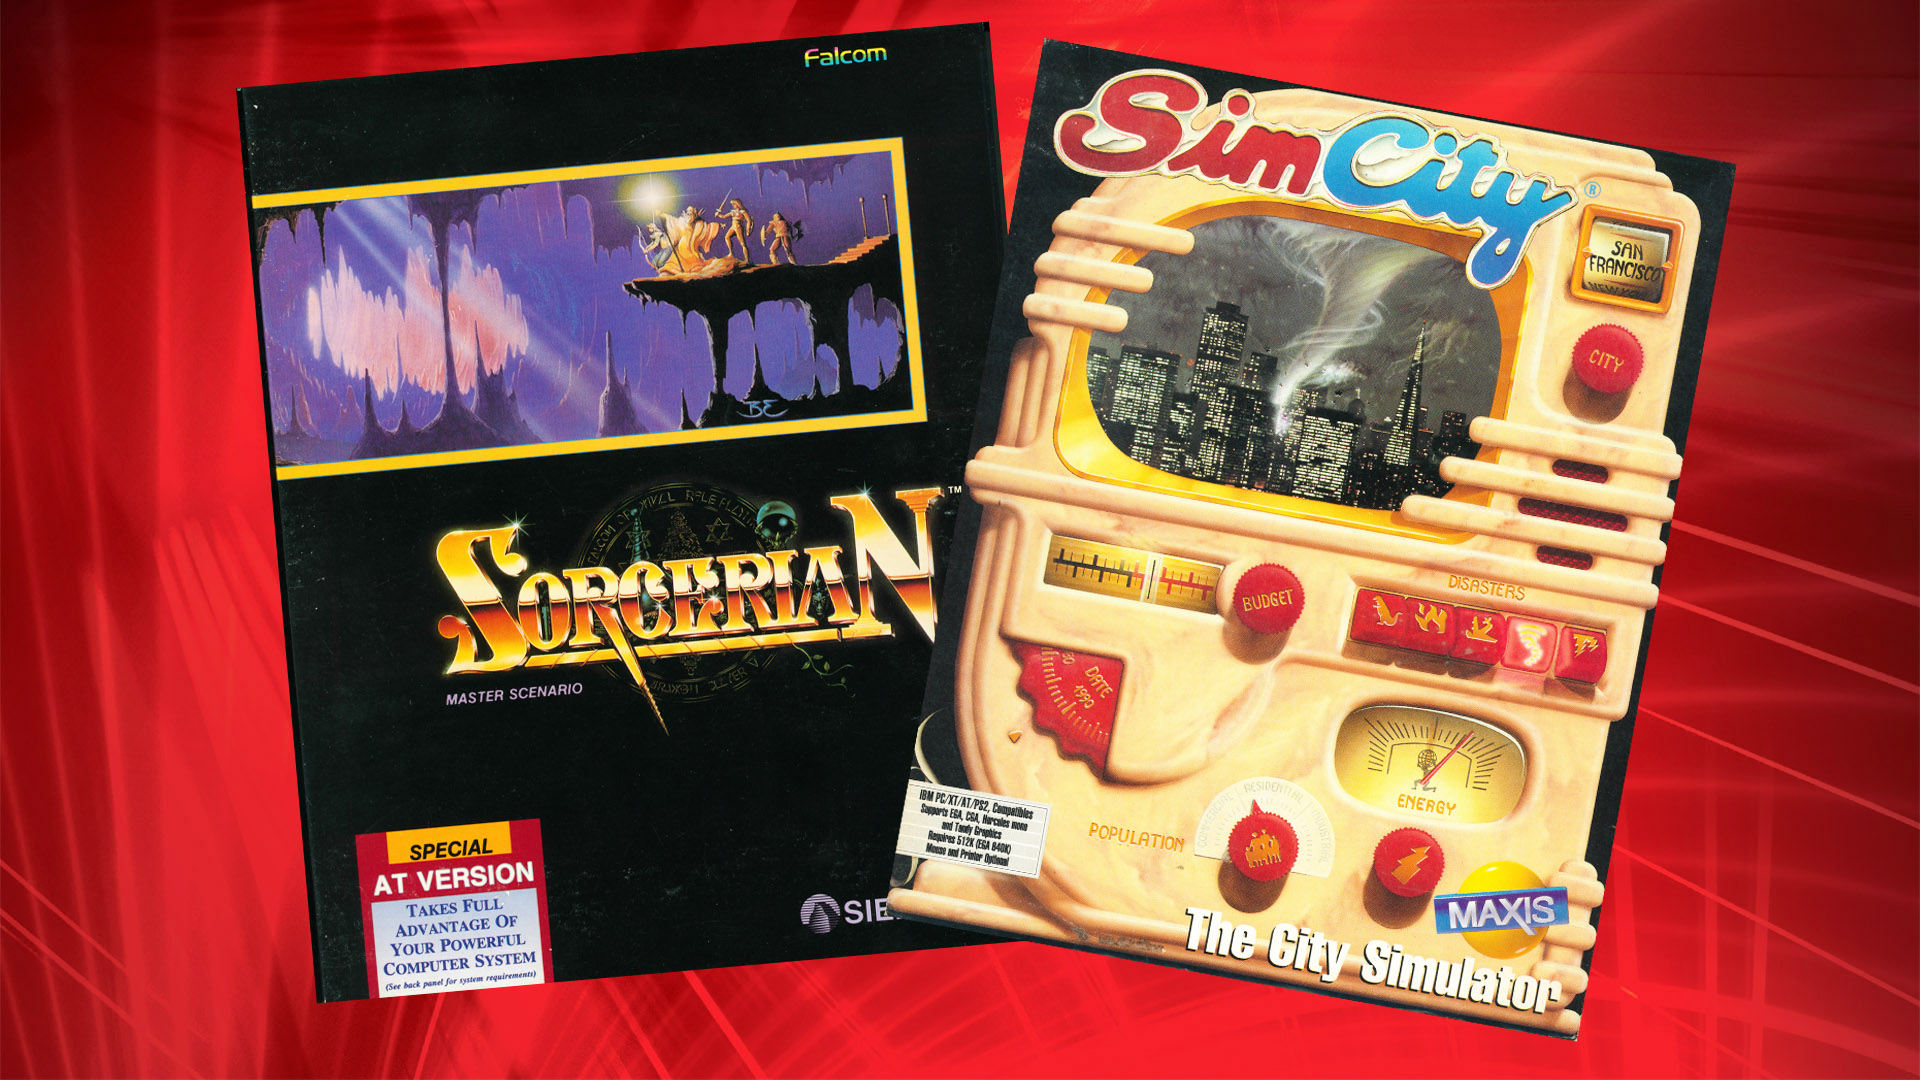 Intel 286: Games for IBM AT, including SimCity and Sorcerian